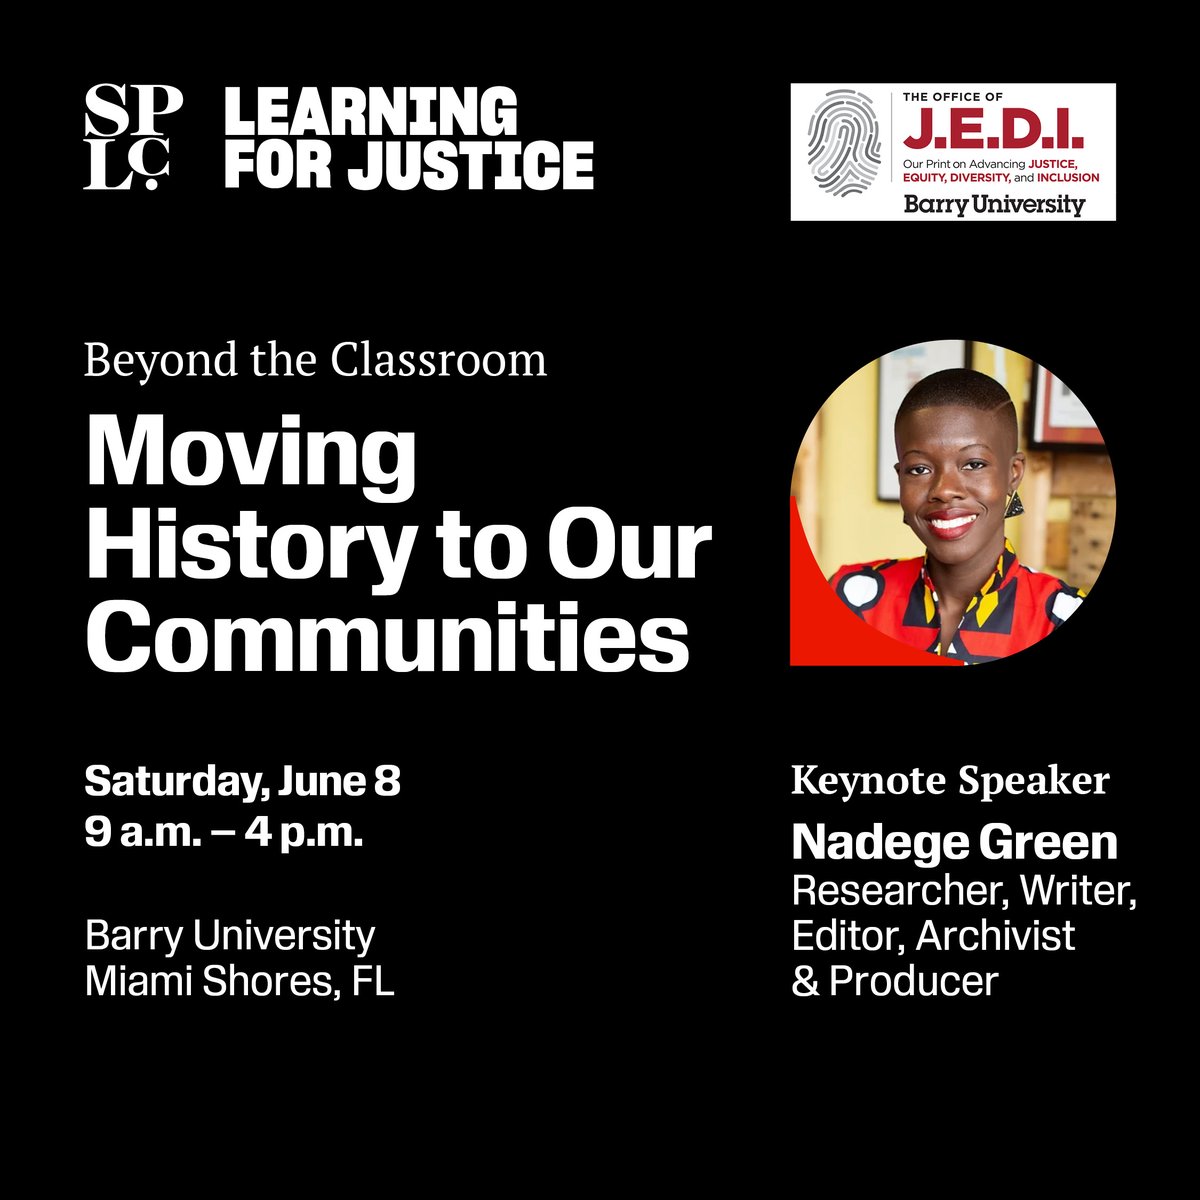 Don't miss the educator workshop presented by the SPLC's Learning for Justice and Barry University, aimed at empowering Black youth and building community through comprehensive Black history education in the classroom and beyond. #LearningForJustice bit.ly/3QPSjwr